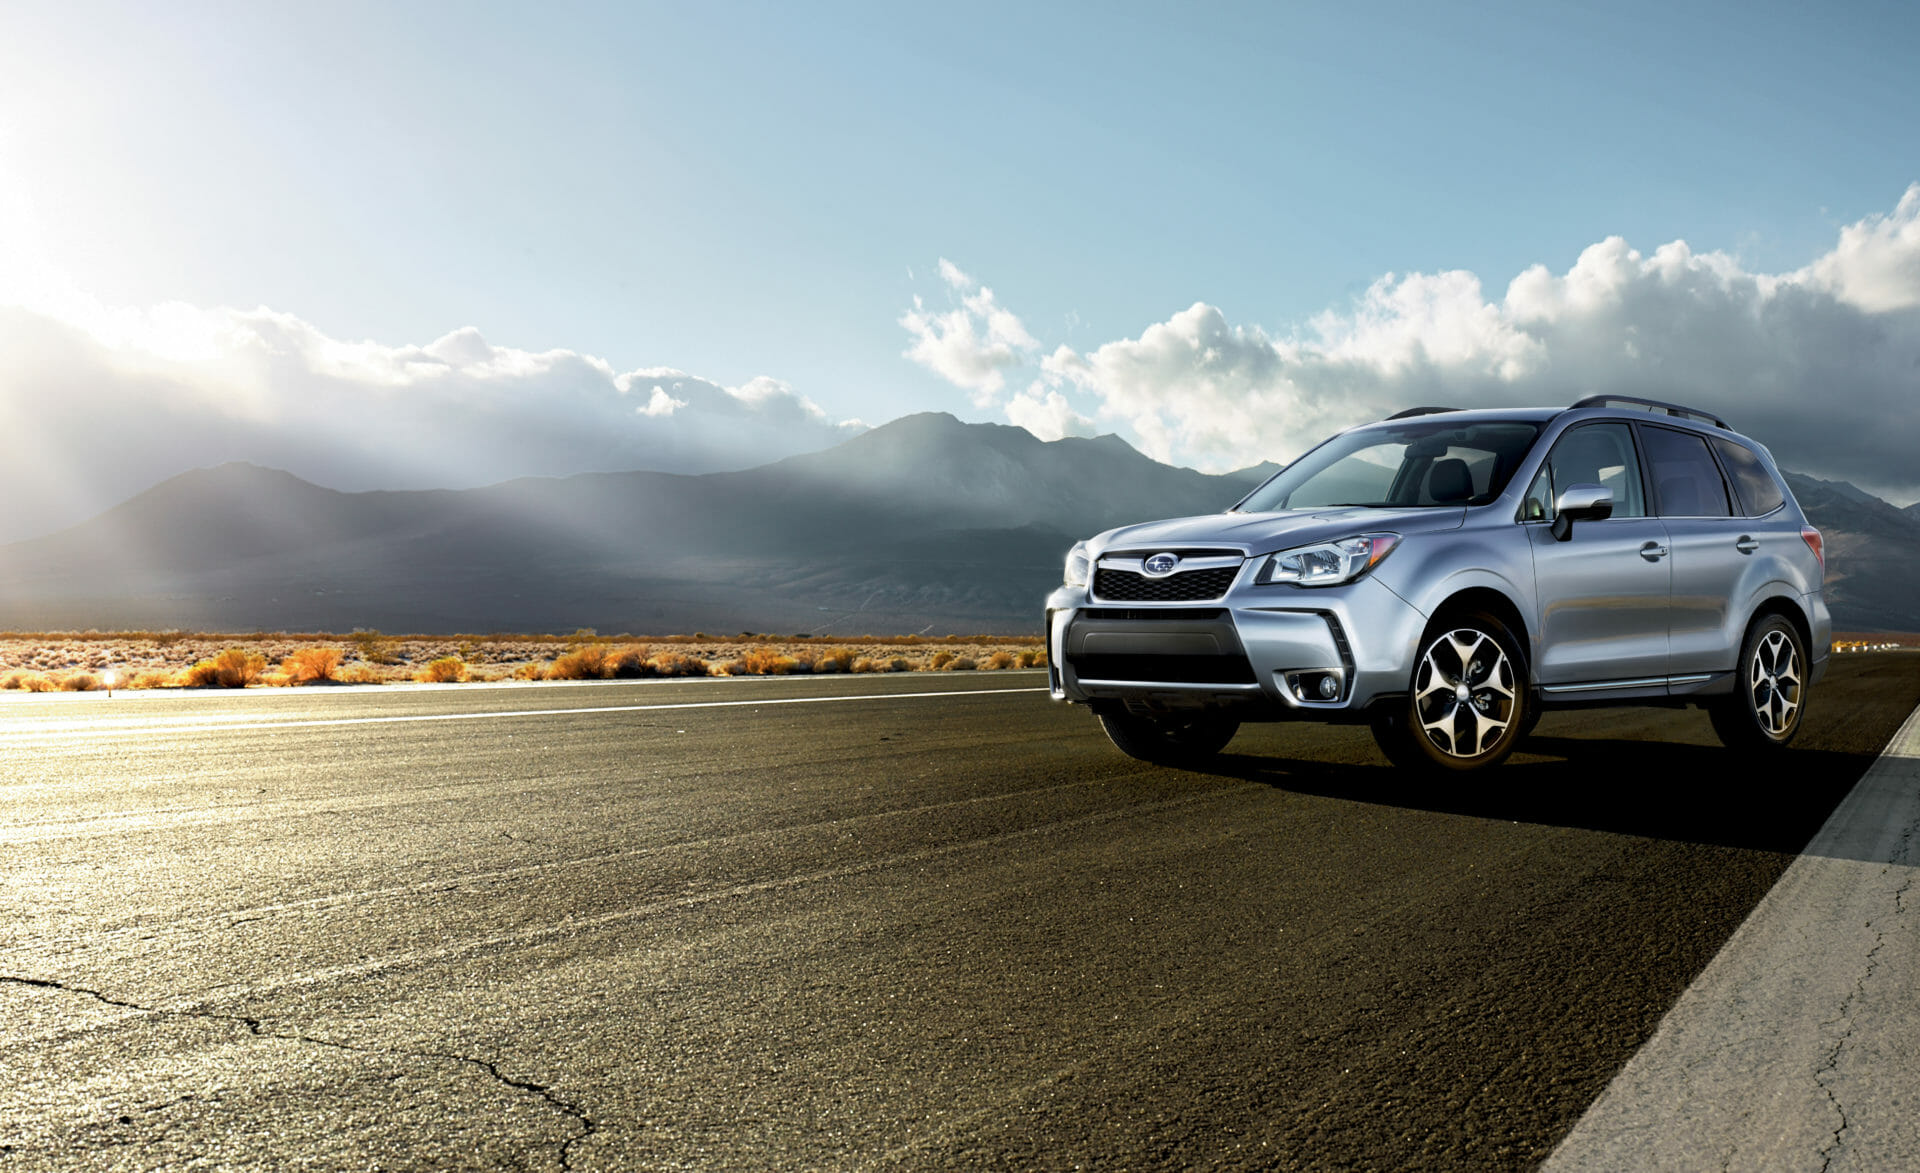 2015 Subaru Forester Review: A Class-Leading Compact SUV Focused on Safety and Comfort